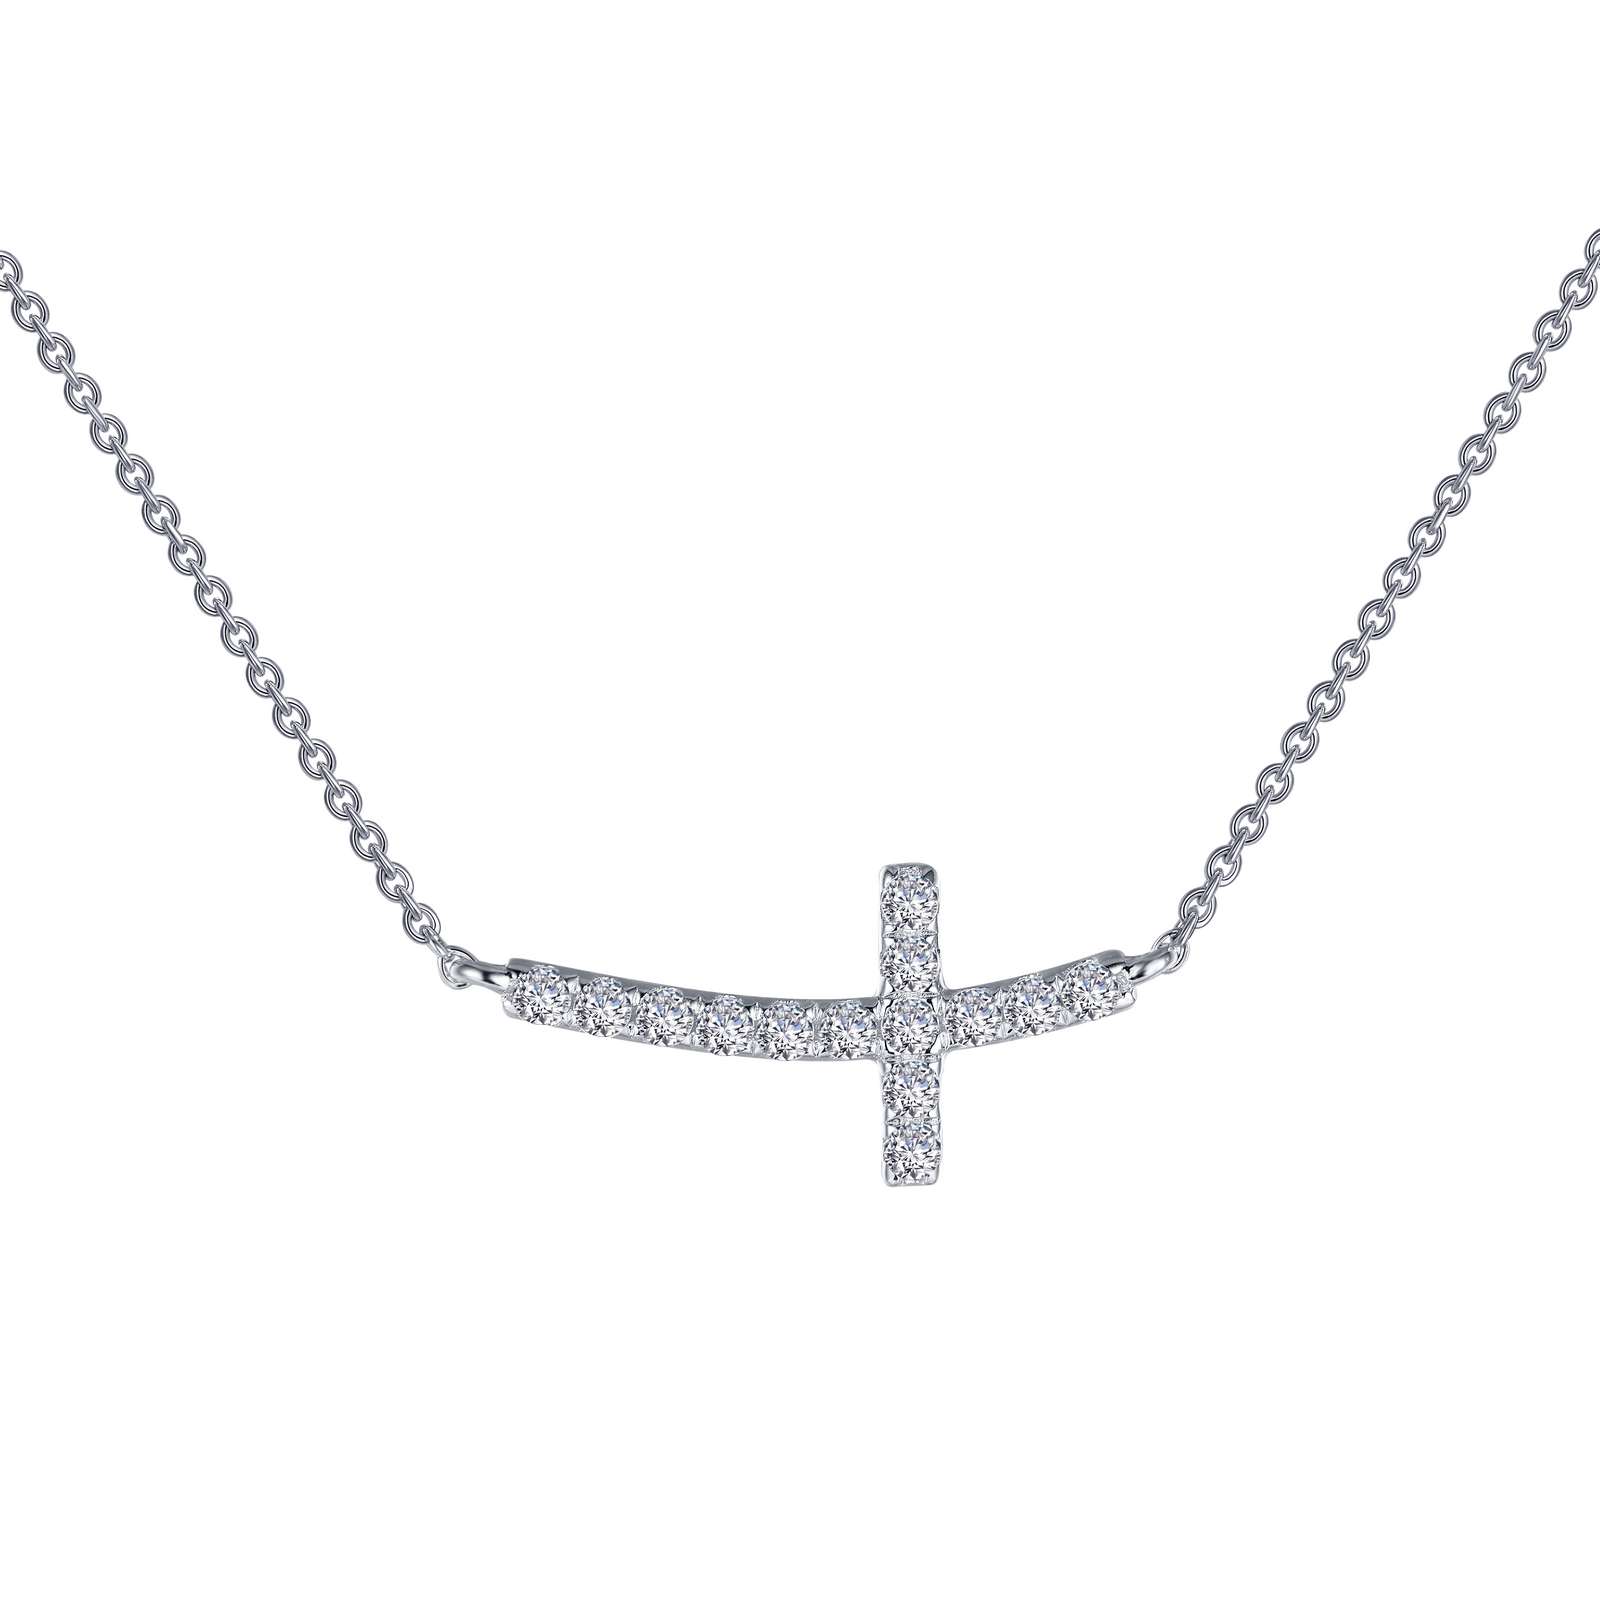 Sideways Curved Cross Necklace Griner Jewelry Co. Moultrie, GA